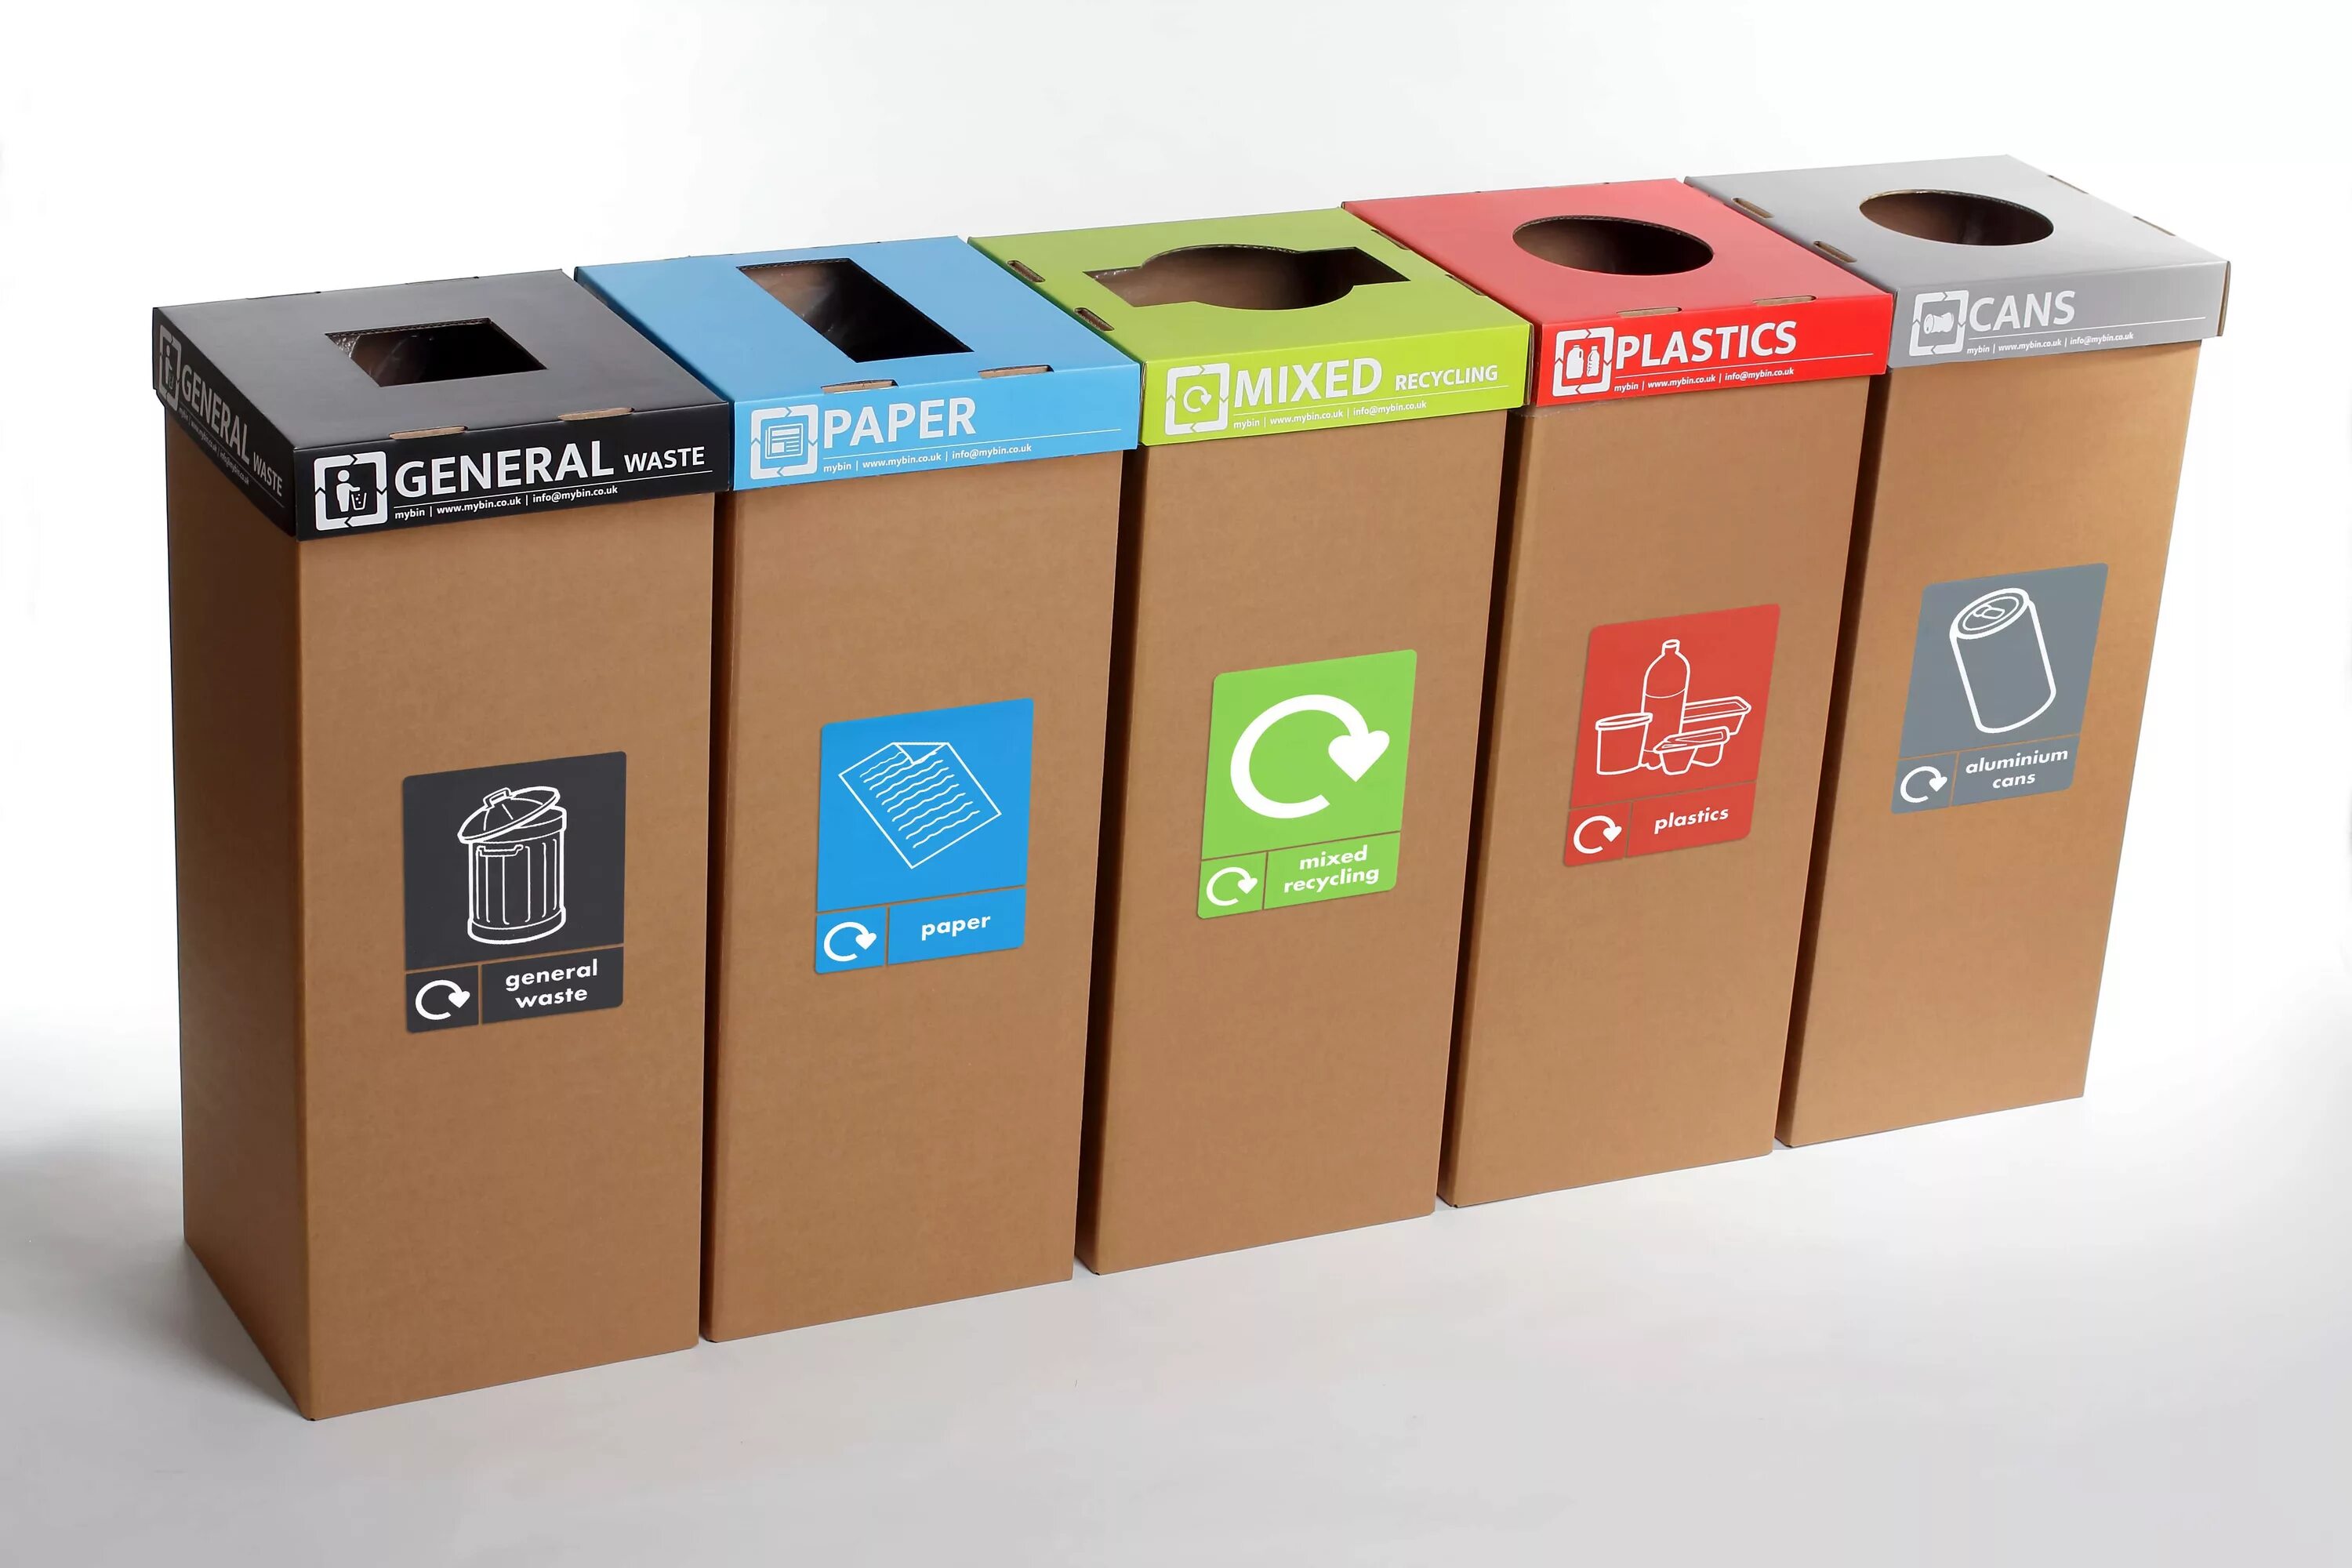 Recycle boxes